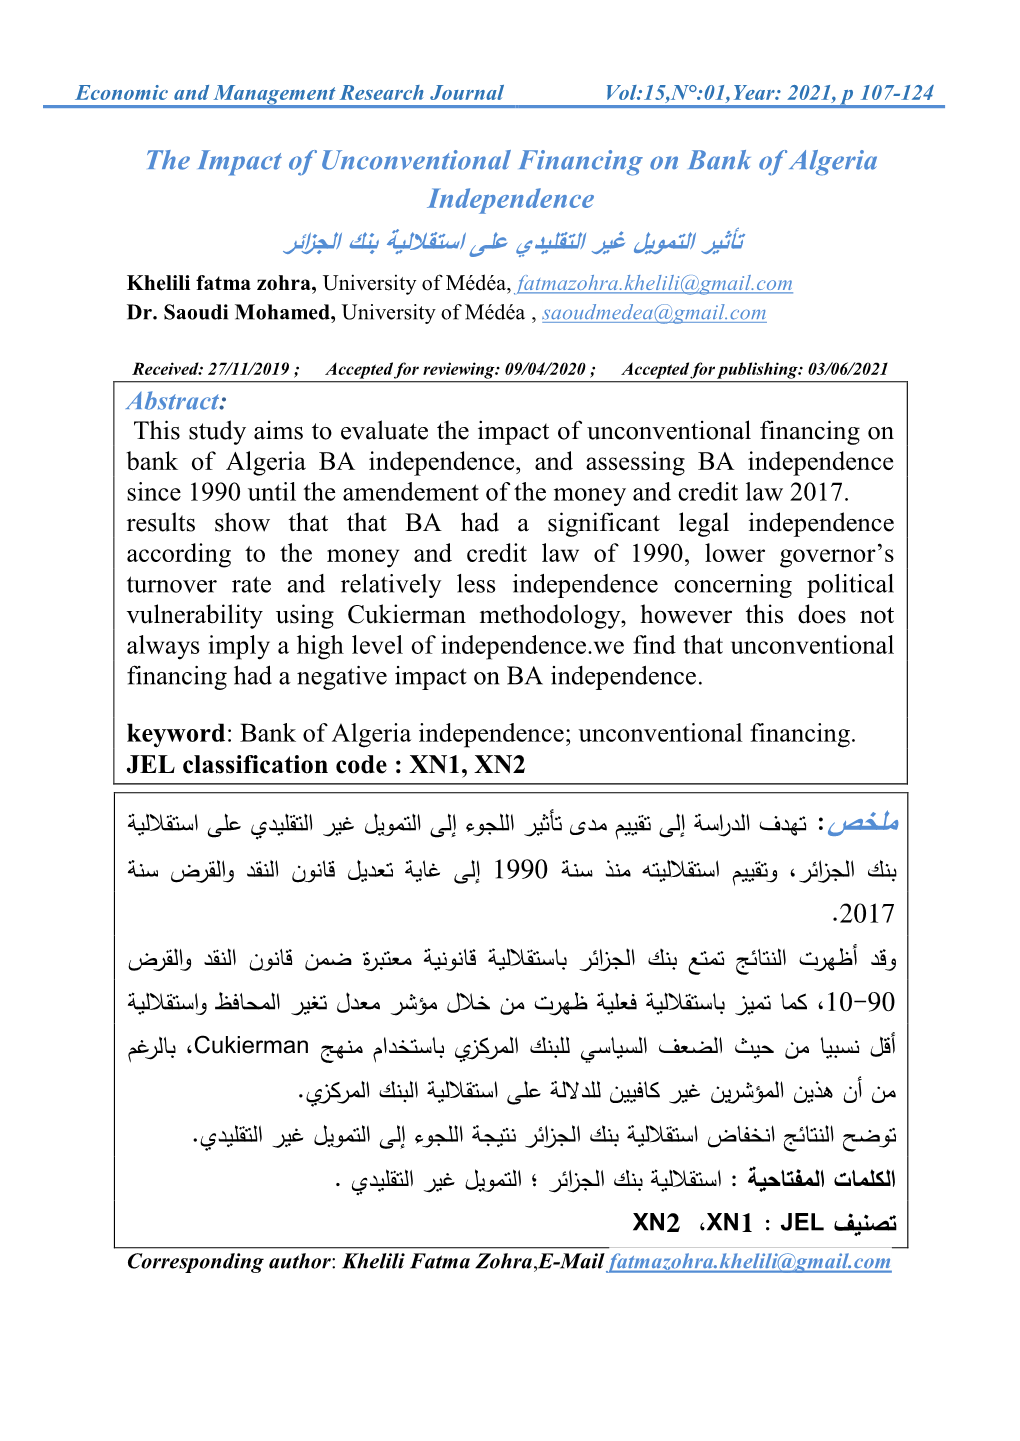 The Impact of Unconventional Financing on Bank of Algeria